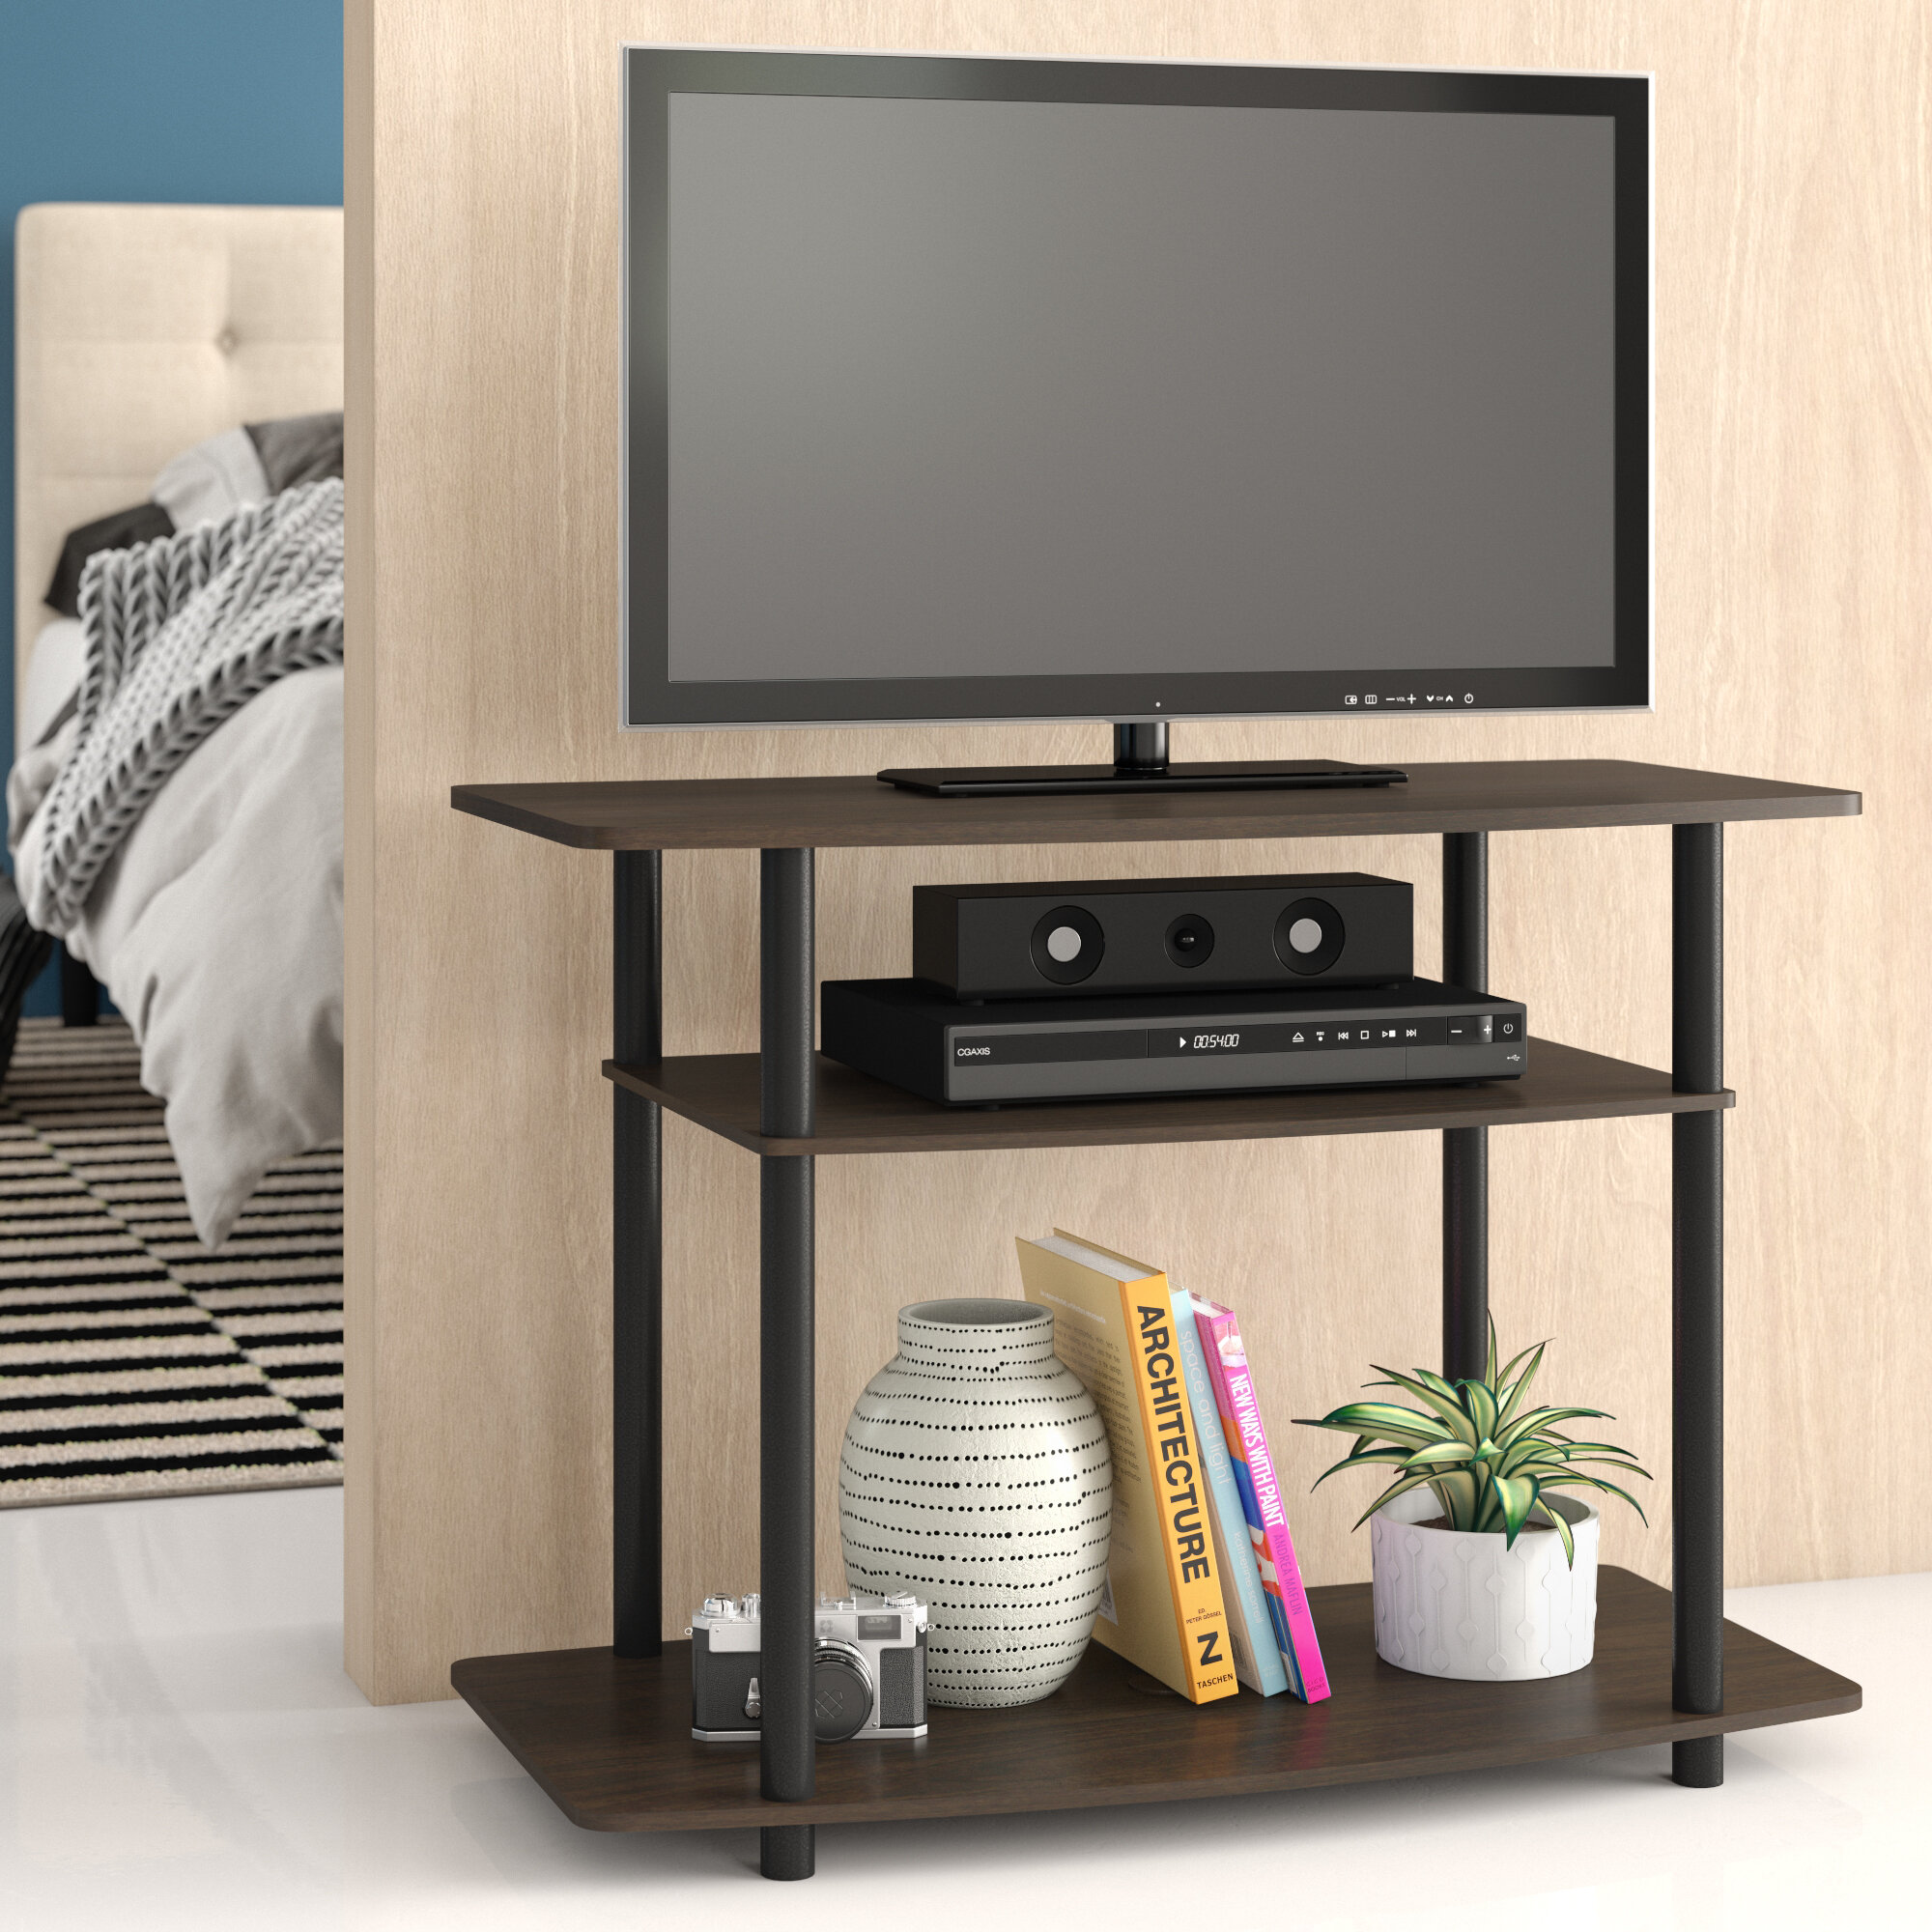 Tv Fireplace Wall Unit Designs New Paulina Tv Stand for Tvs Up to 32"